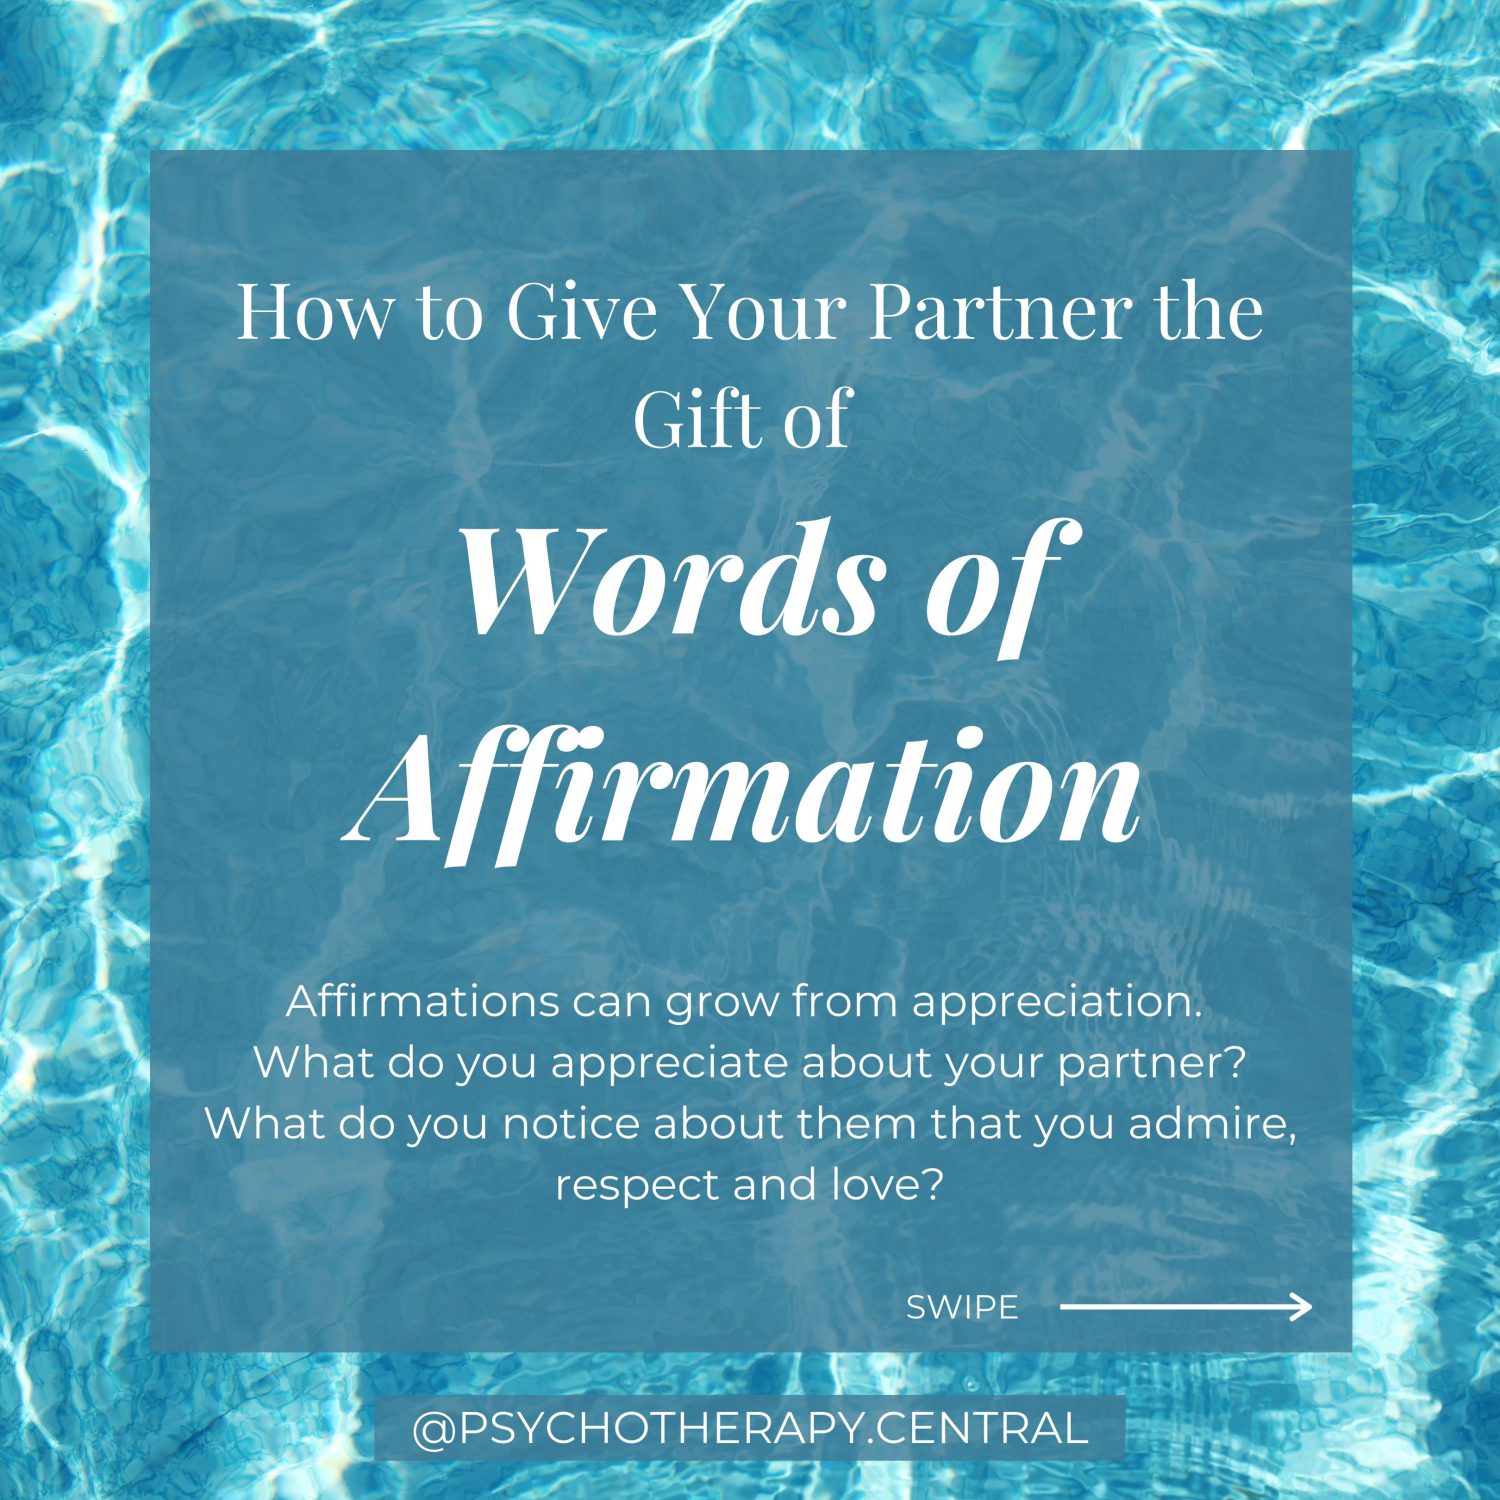 How to Give Your Partner the Gift of Words of Affirmation